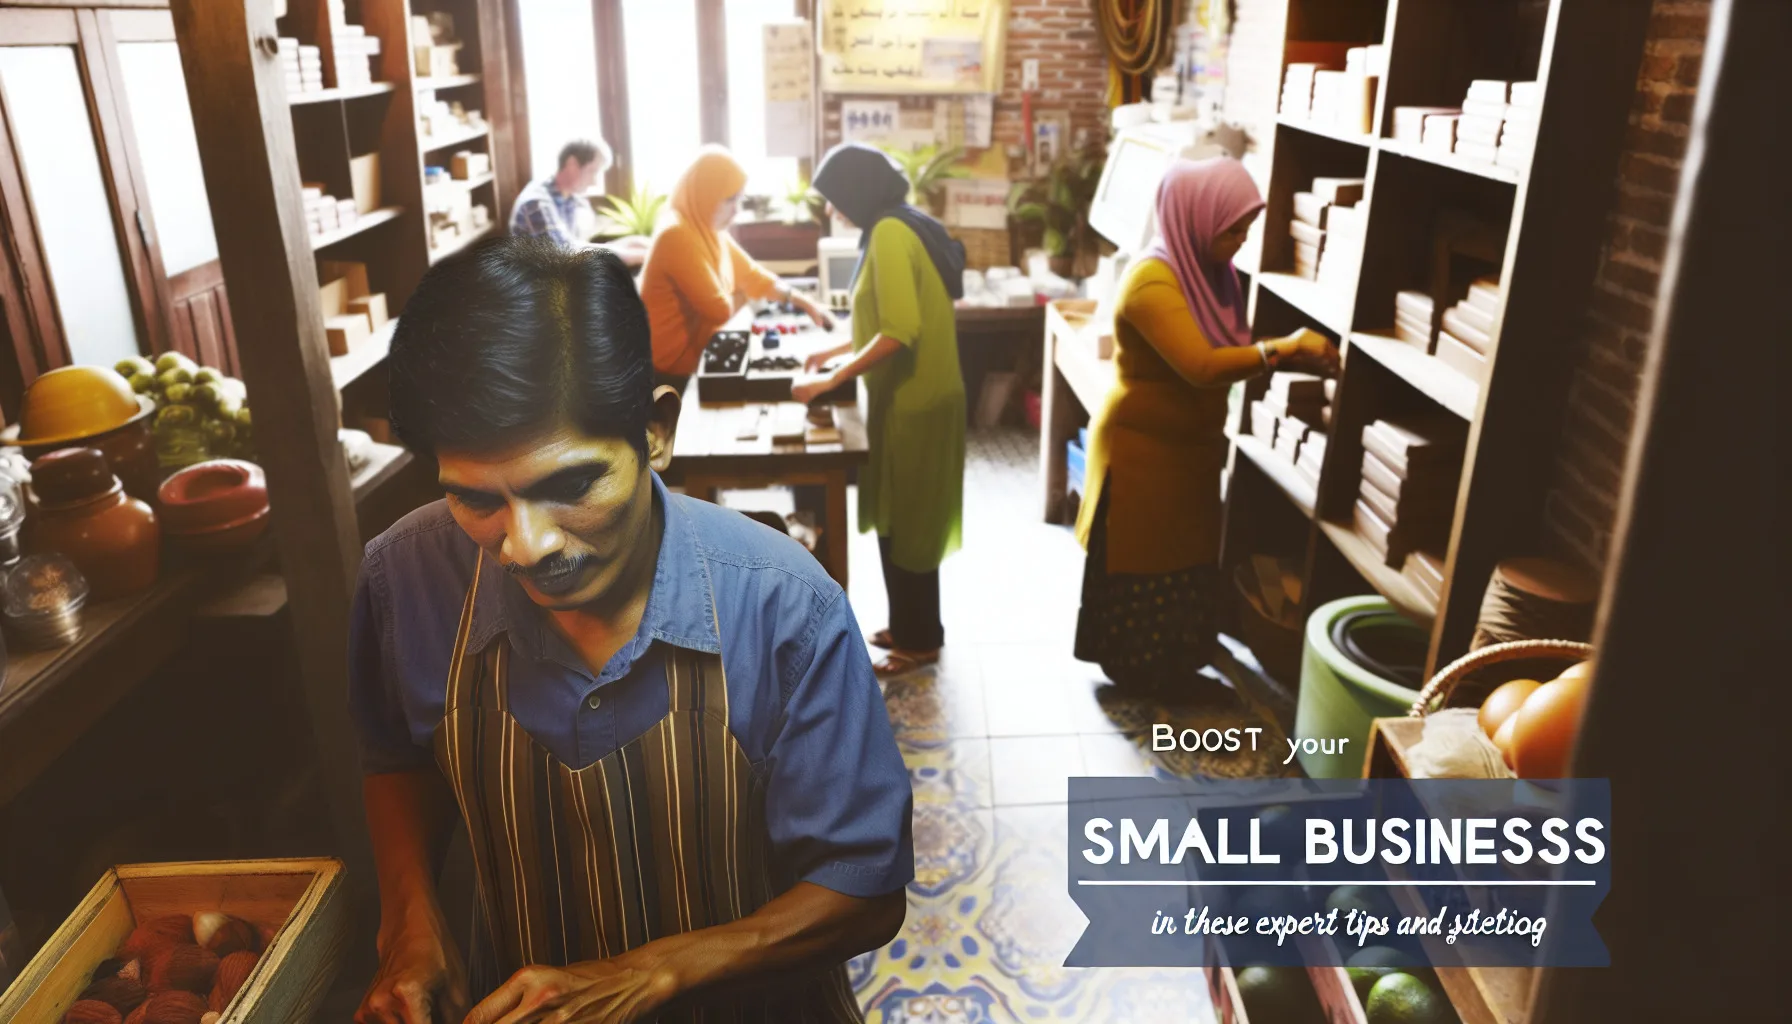 Boost your small business's blog with these expert tips and strategies.